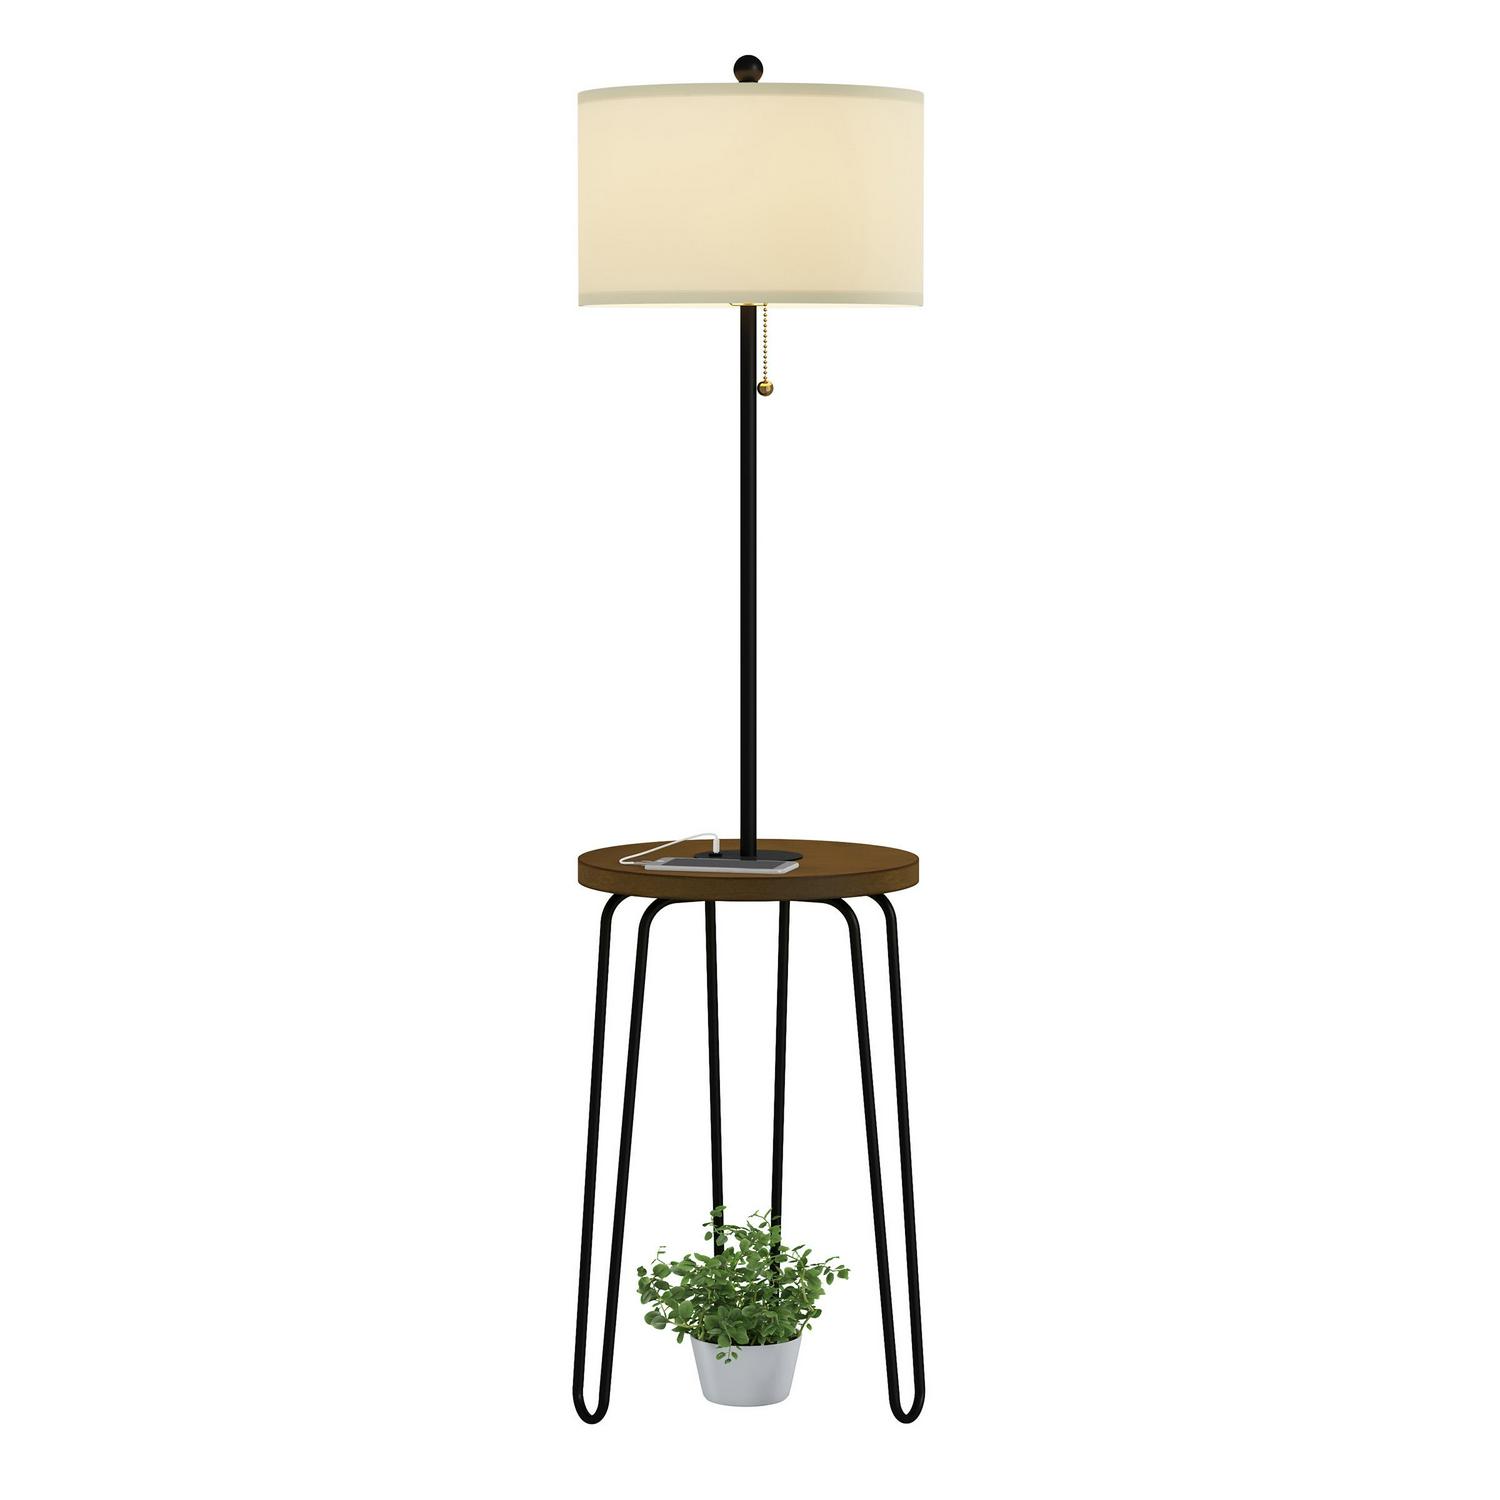 Lavish Home Floor Lamp with Table， USB Port， and Hairpin Legs a Standing Light with Shelves